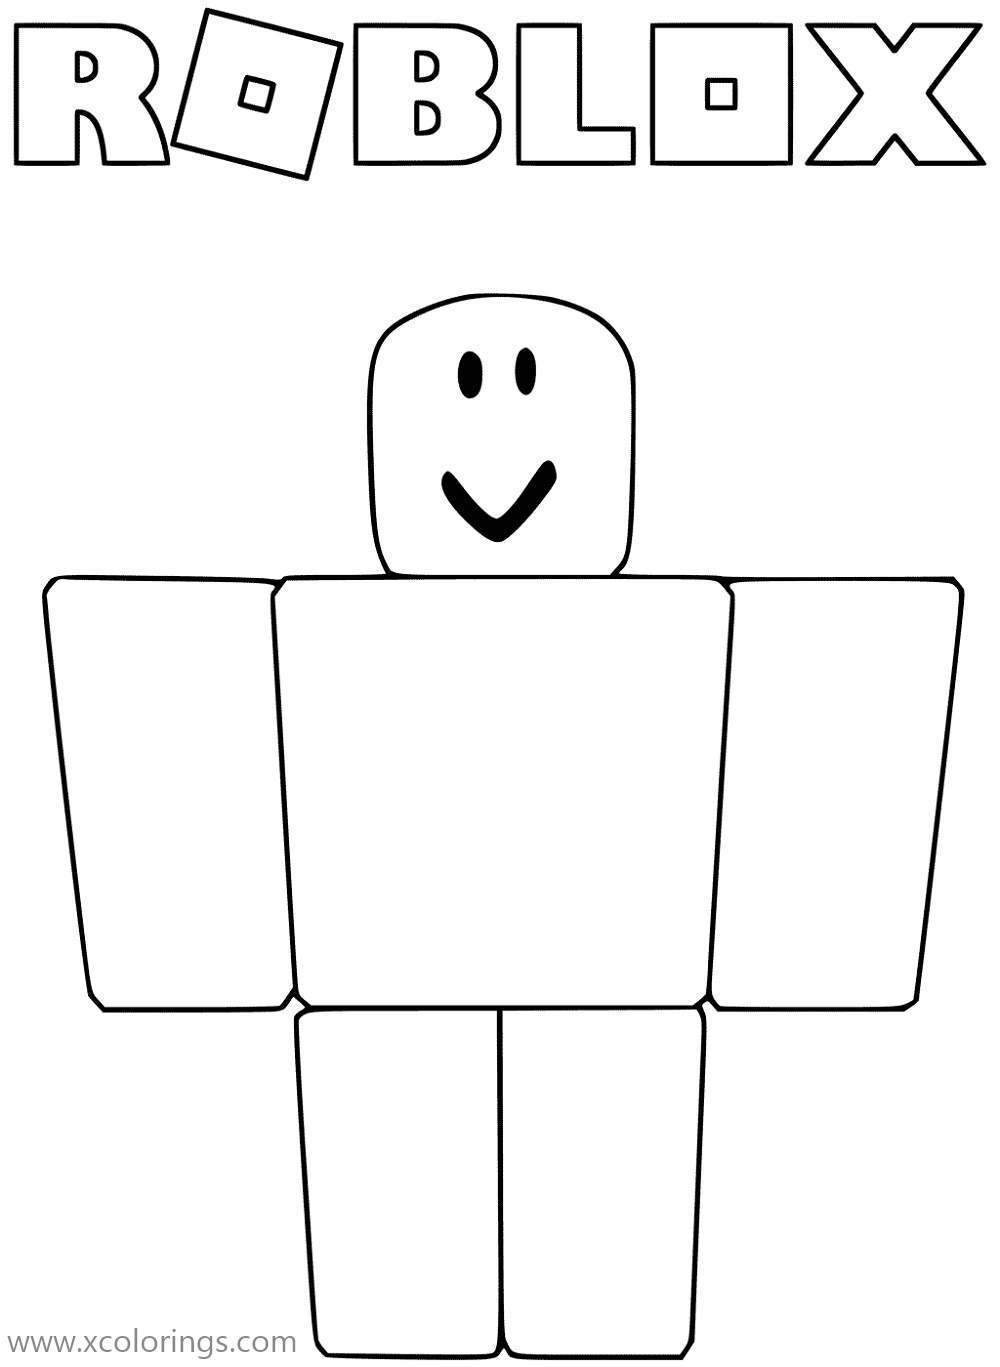 Free Cubic Roblox Character Coloring Pages printable